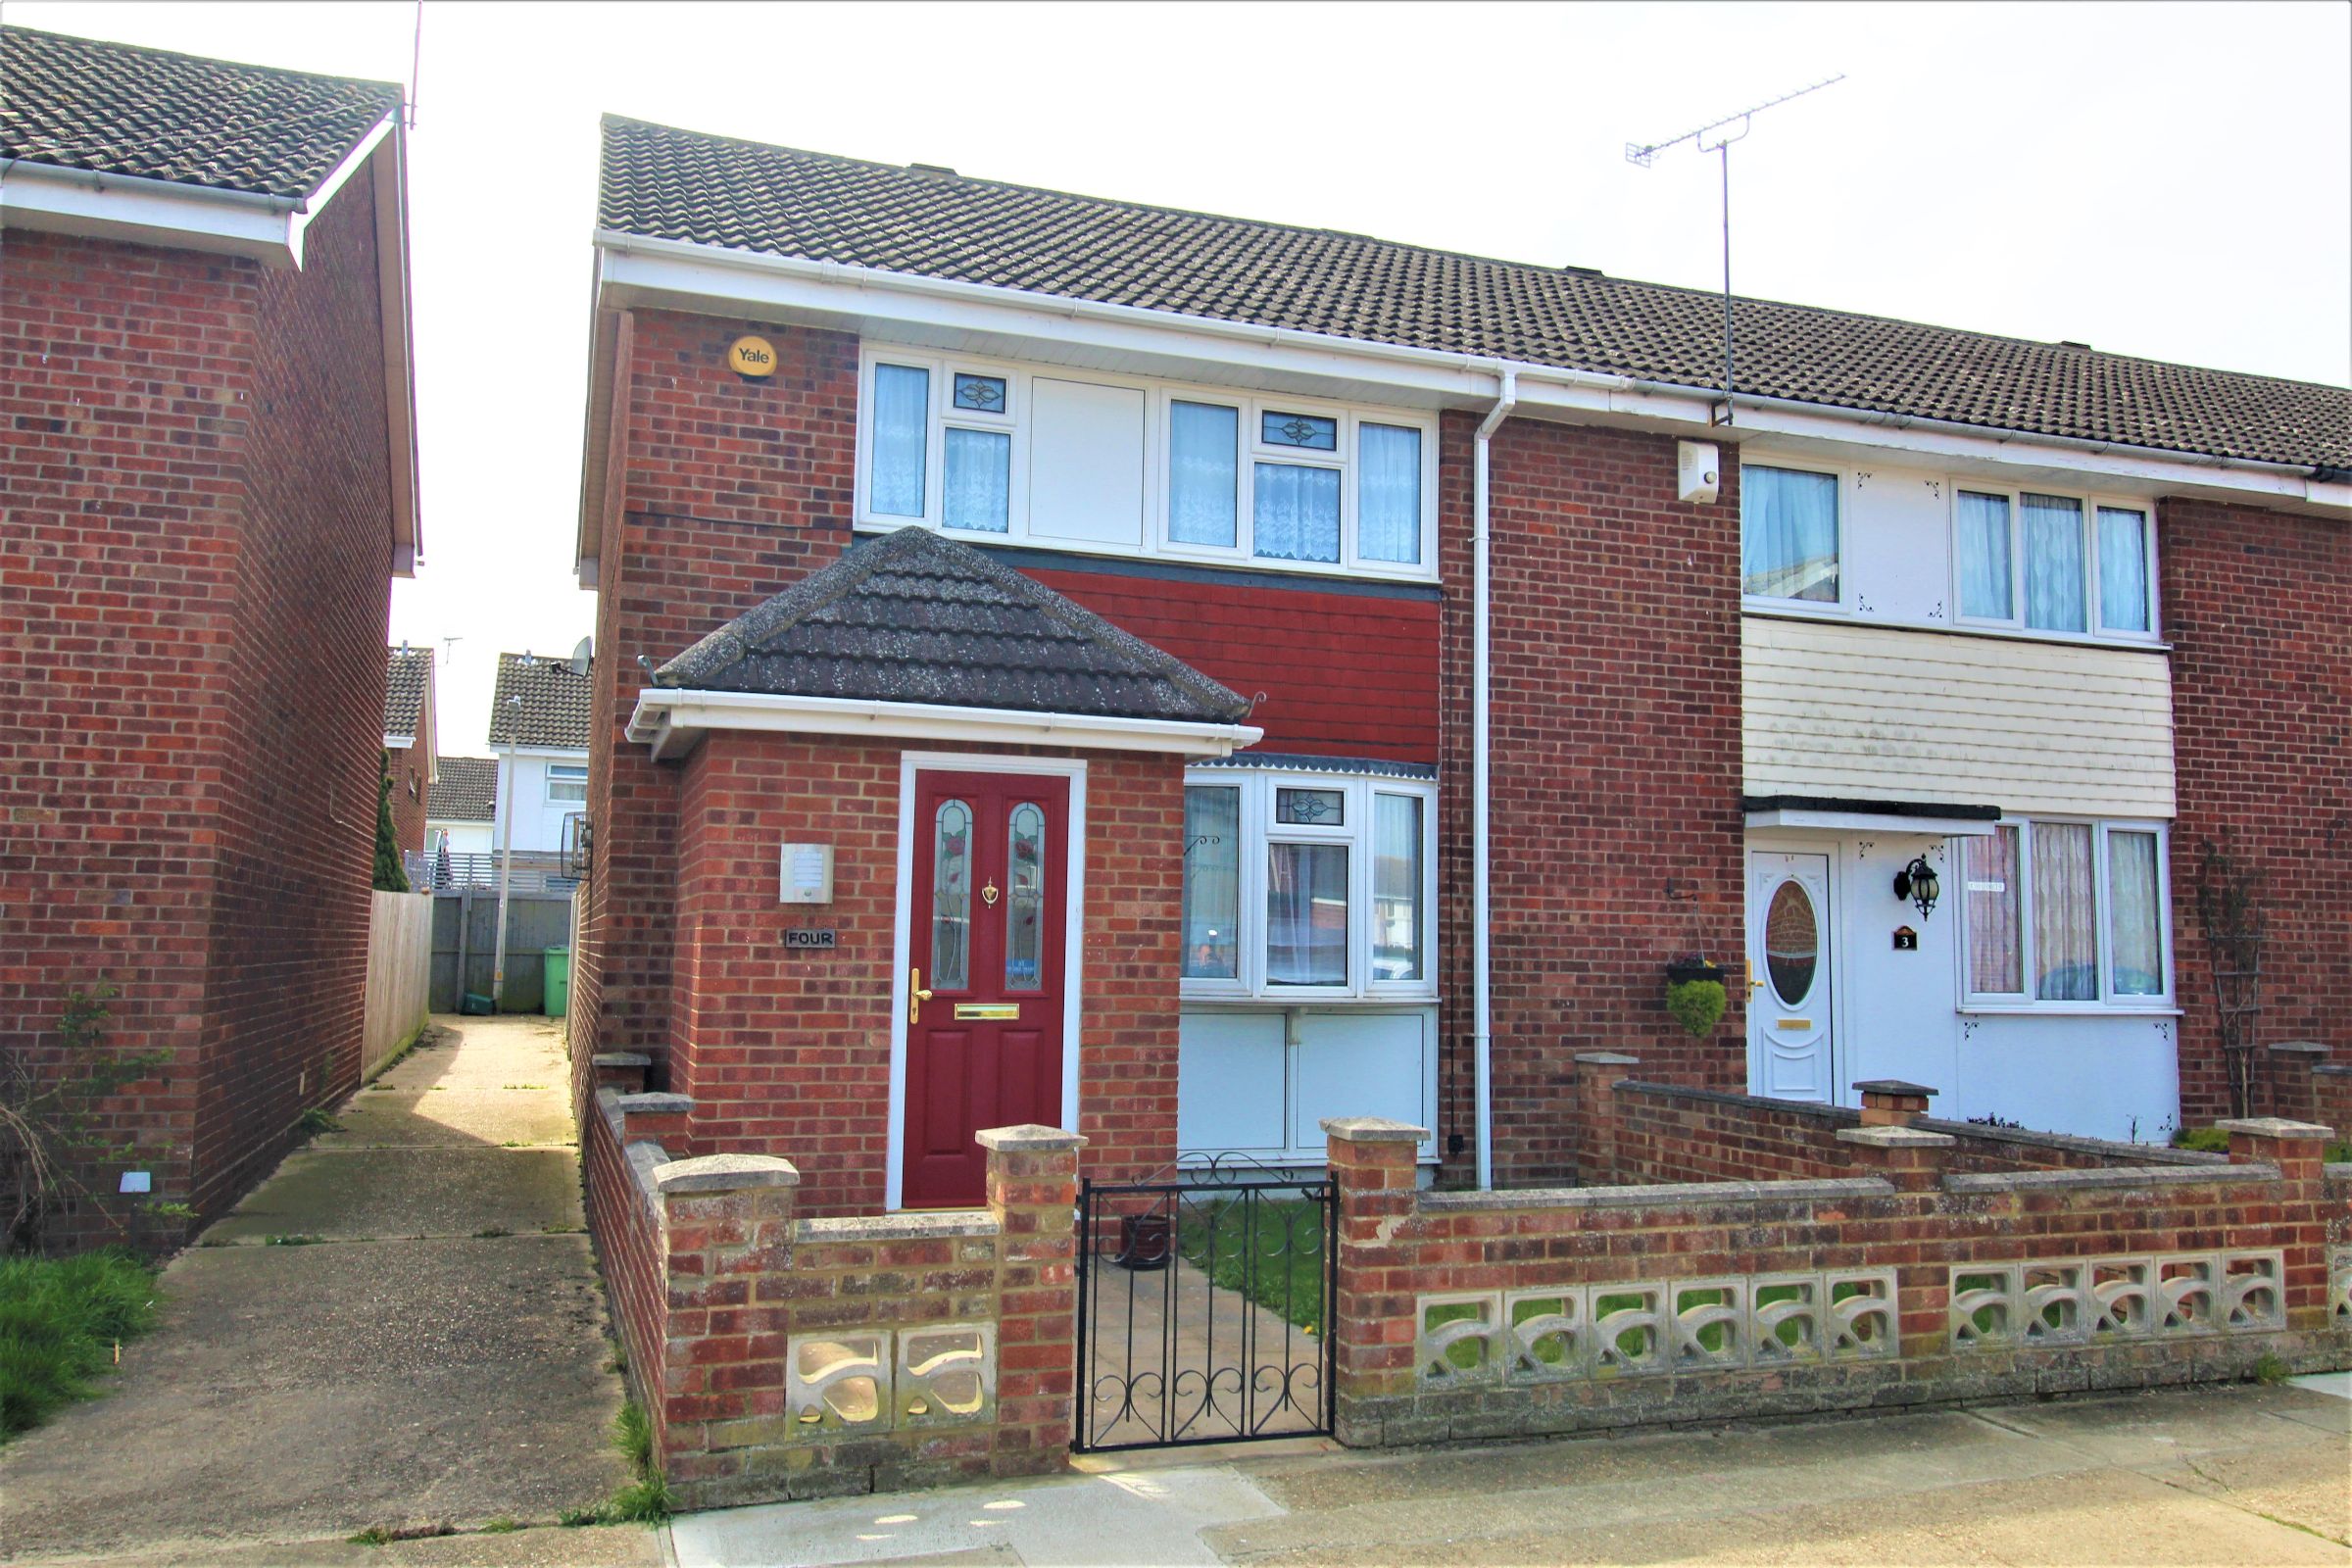 3 bed End Terraced House for rent in Witham. From Yaxley Homes